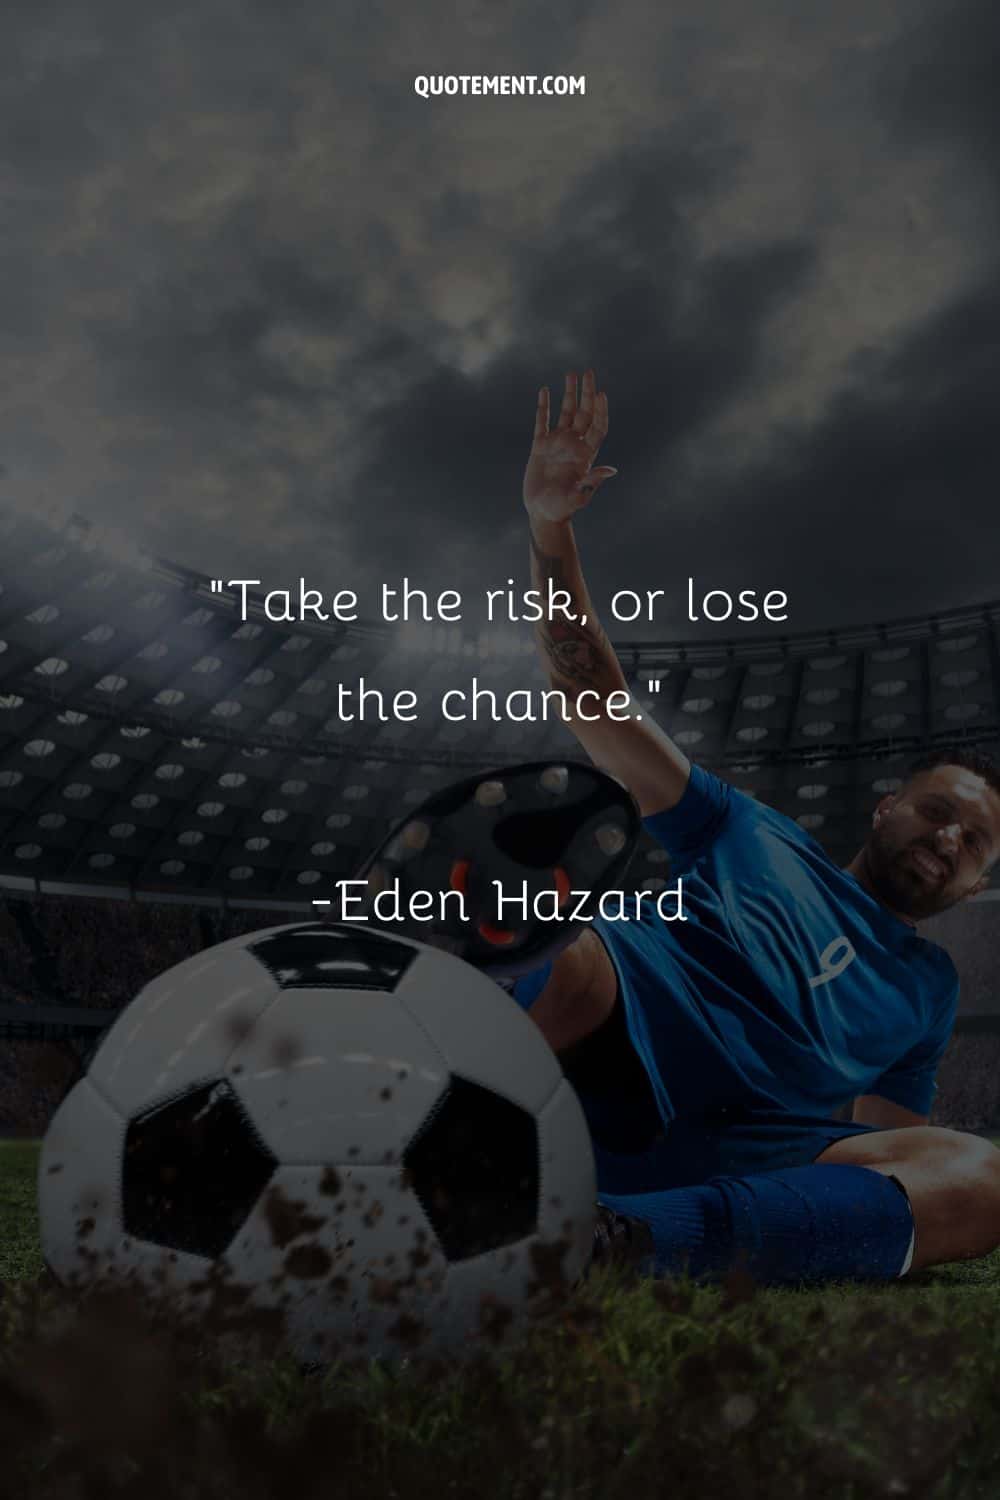 Player's slide, all lights on the game representing sports quote soccer